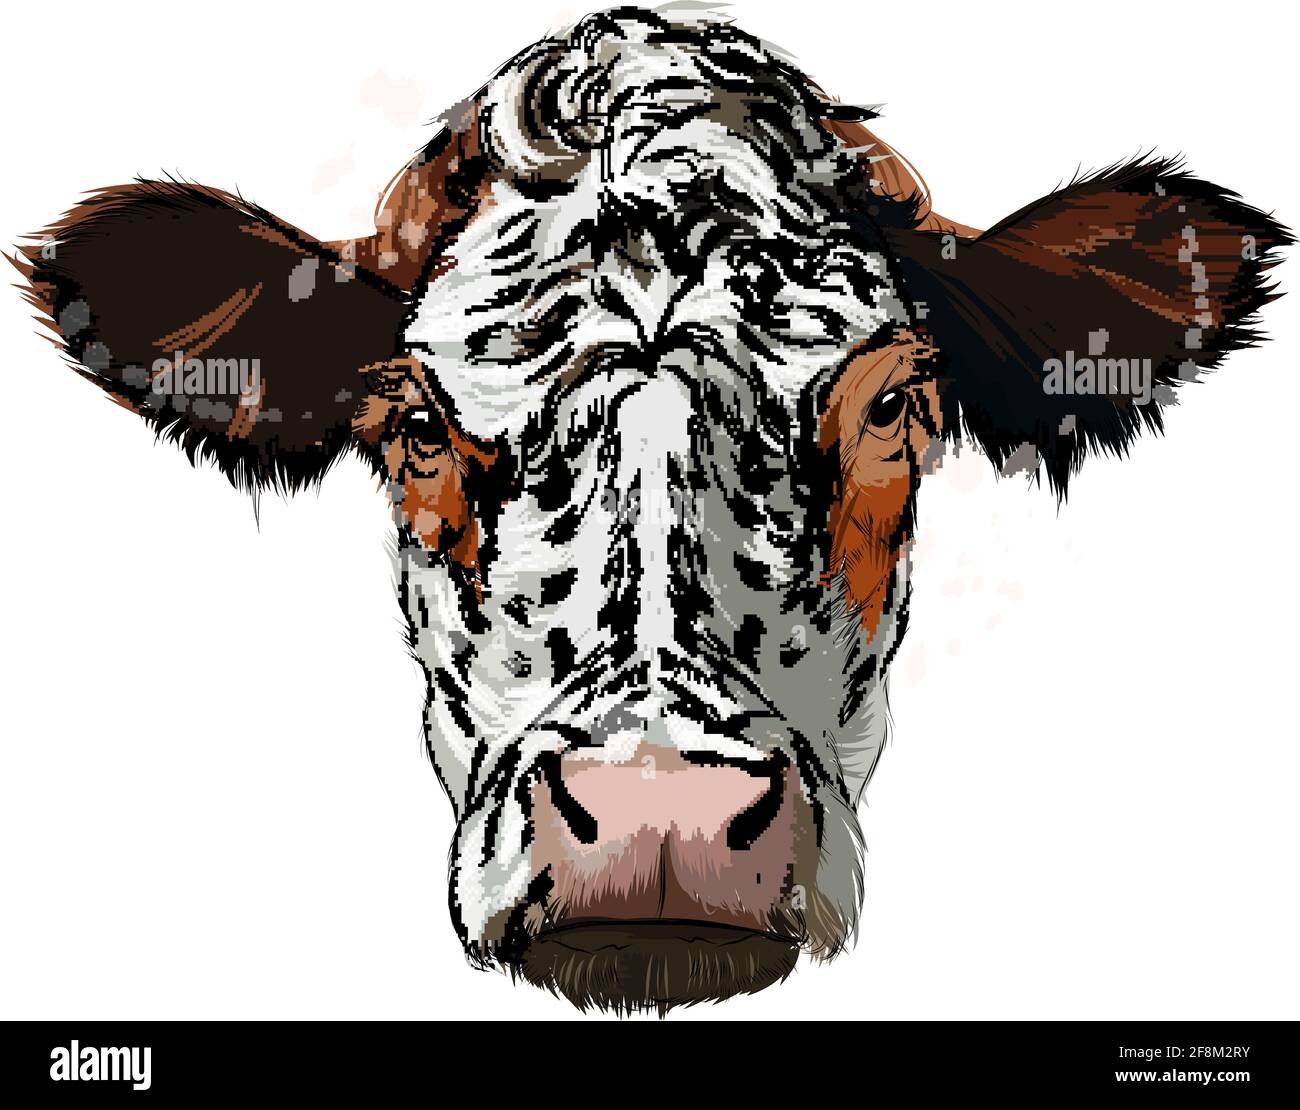 cattle head drawing